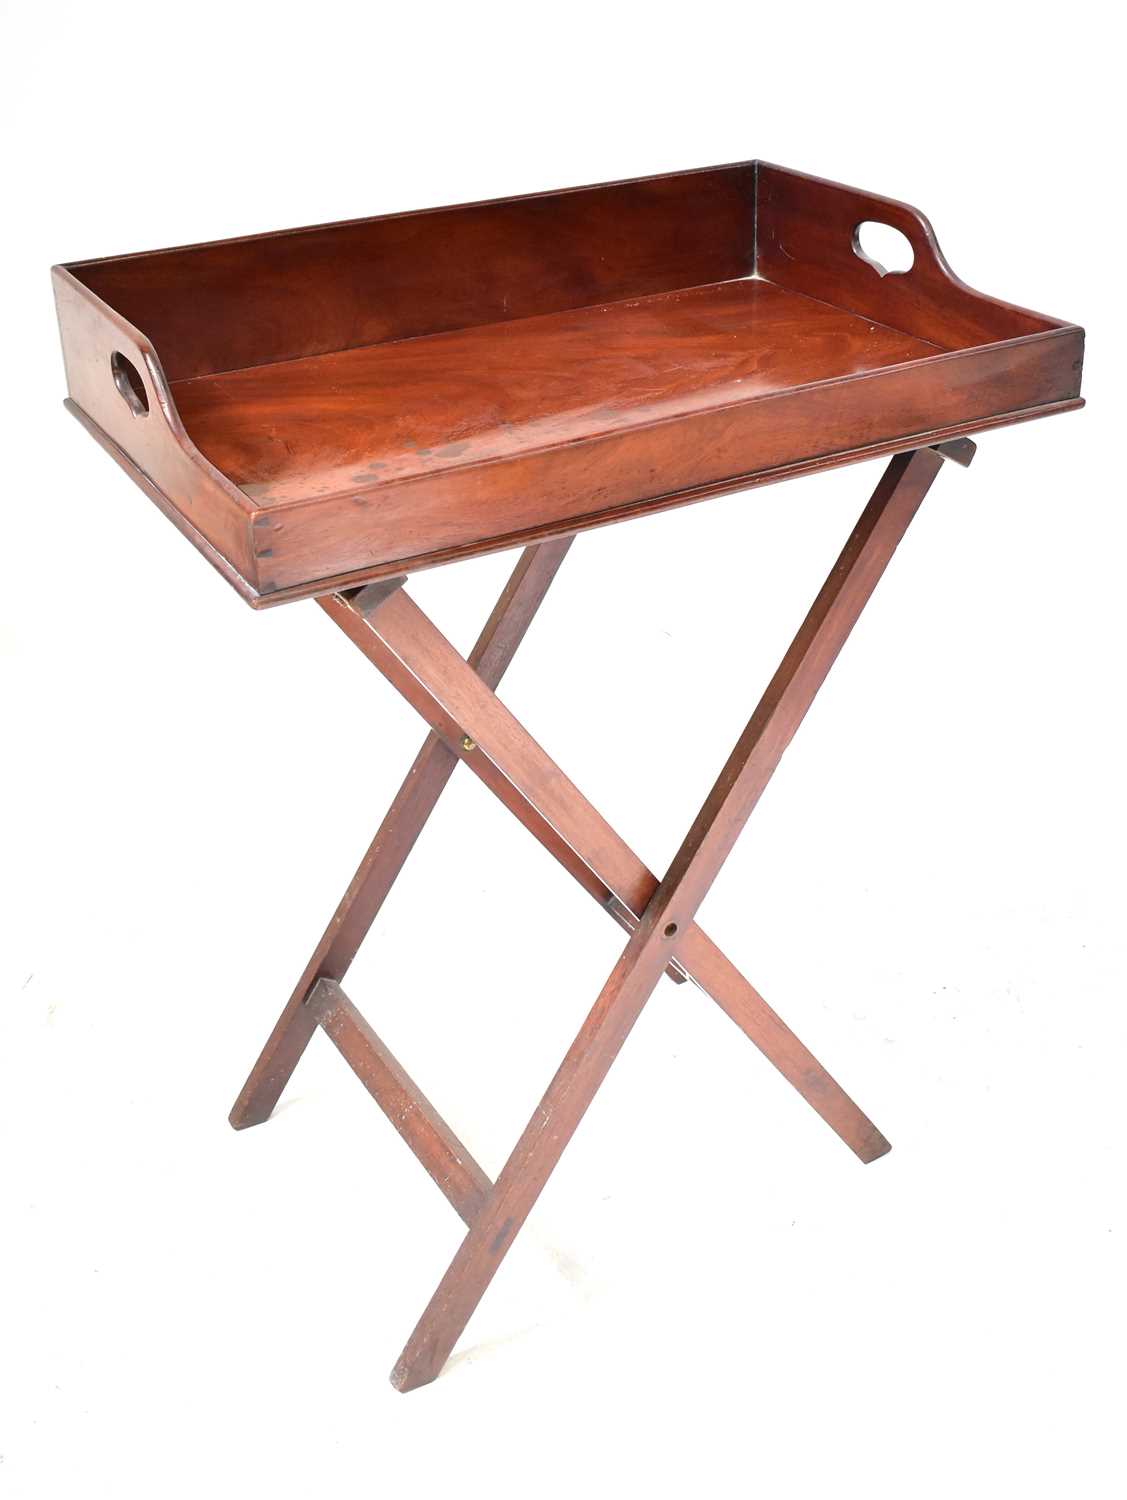 A 19th century mahogany butler's tray on folding stand, 99 x 75 x 49cm. Condition Report: Top has